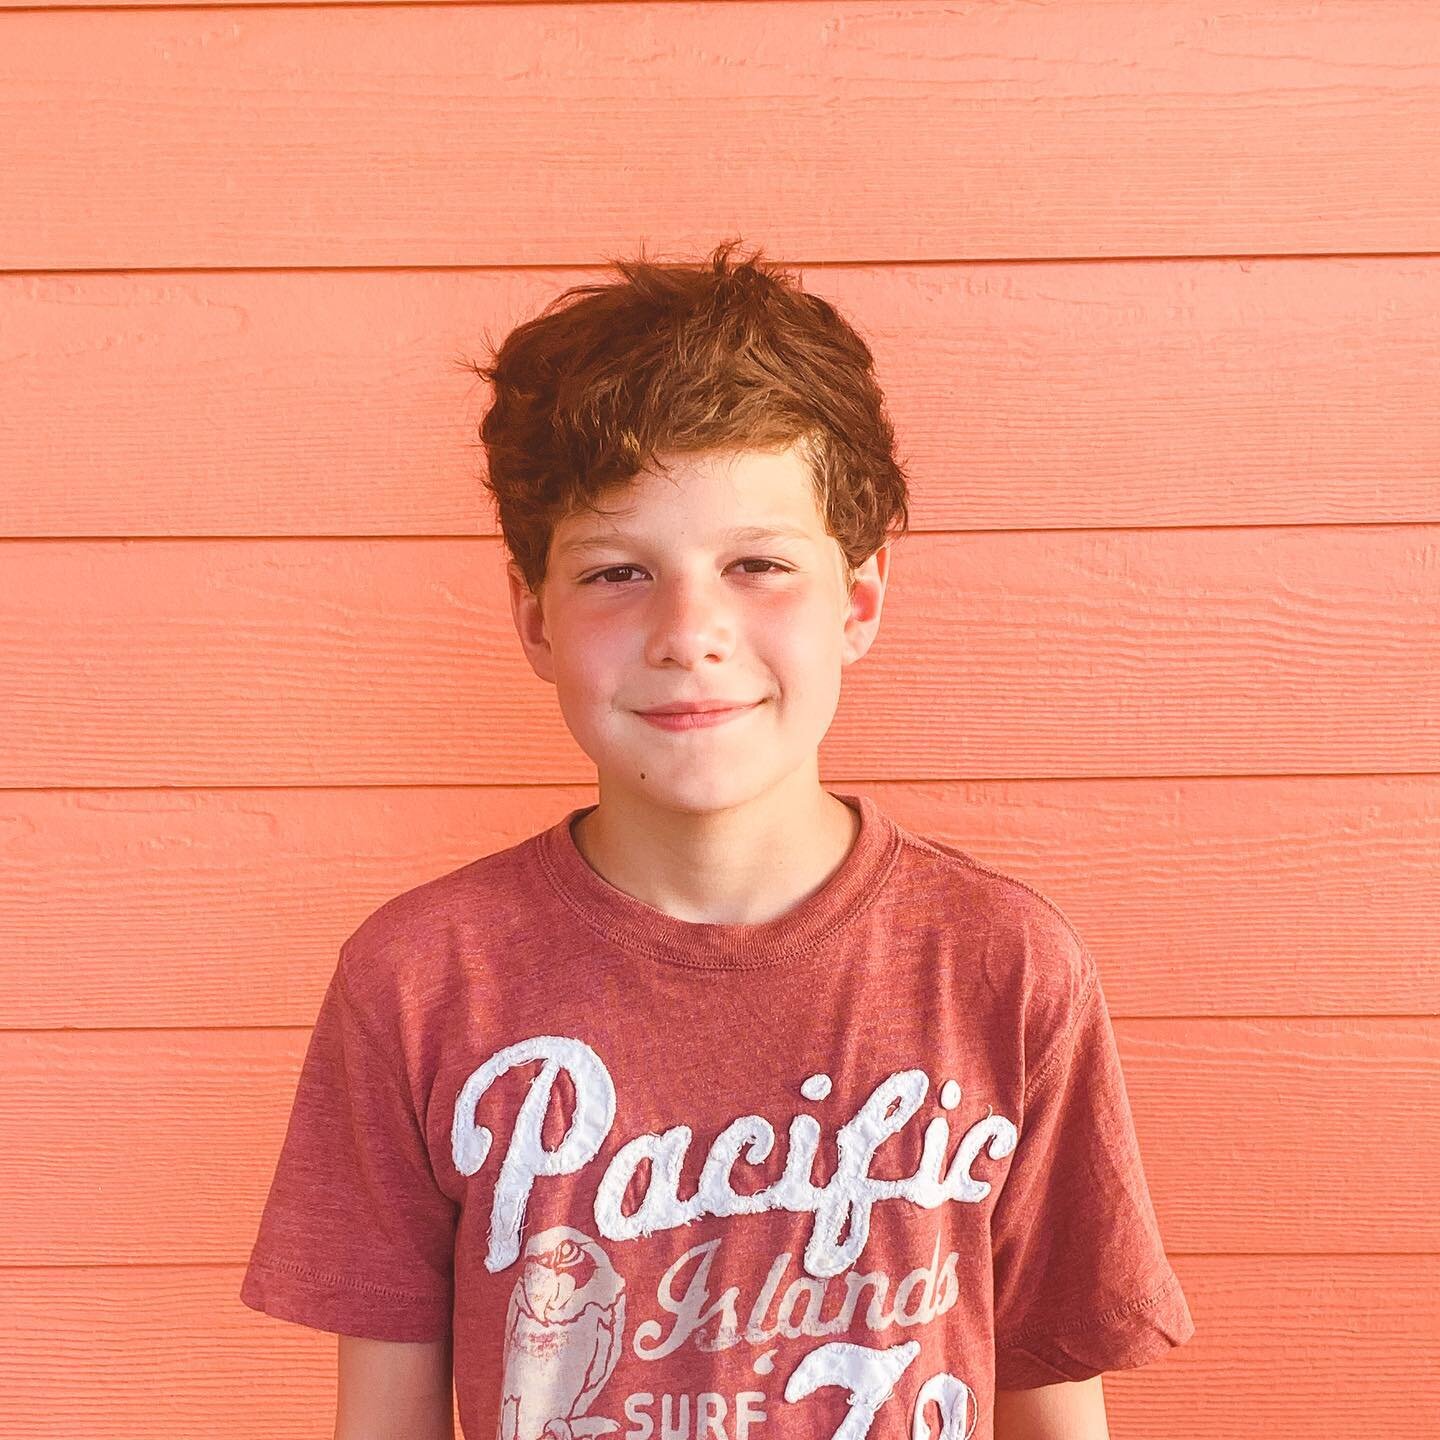 Yesterday this guy turned 13!!! We had a sun/fun filled day in Cocoa Beach and he stood up on a surfboard for the first time! It is hard to believe my little curly headed warrior poet is officially a teenager. 
Eli, you have grown and matured in so m